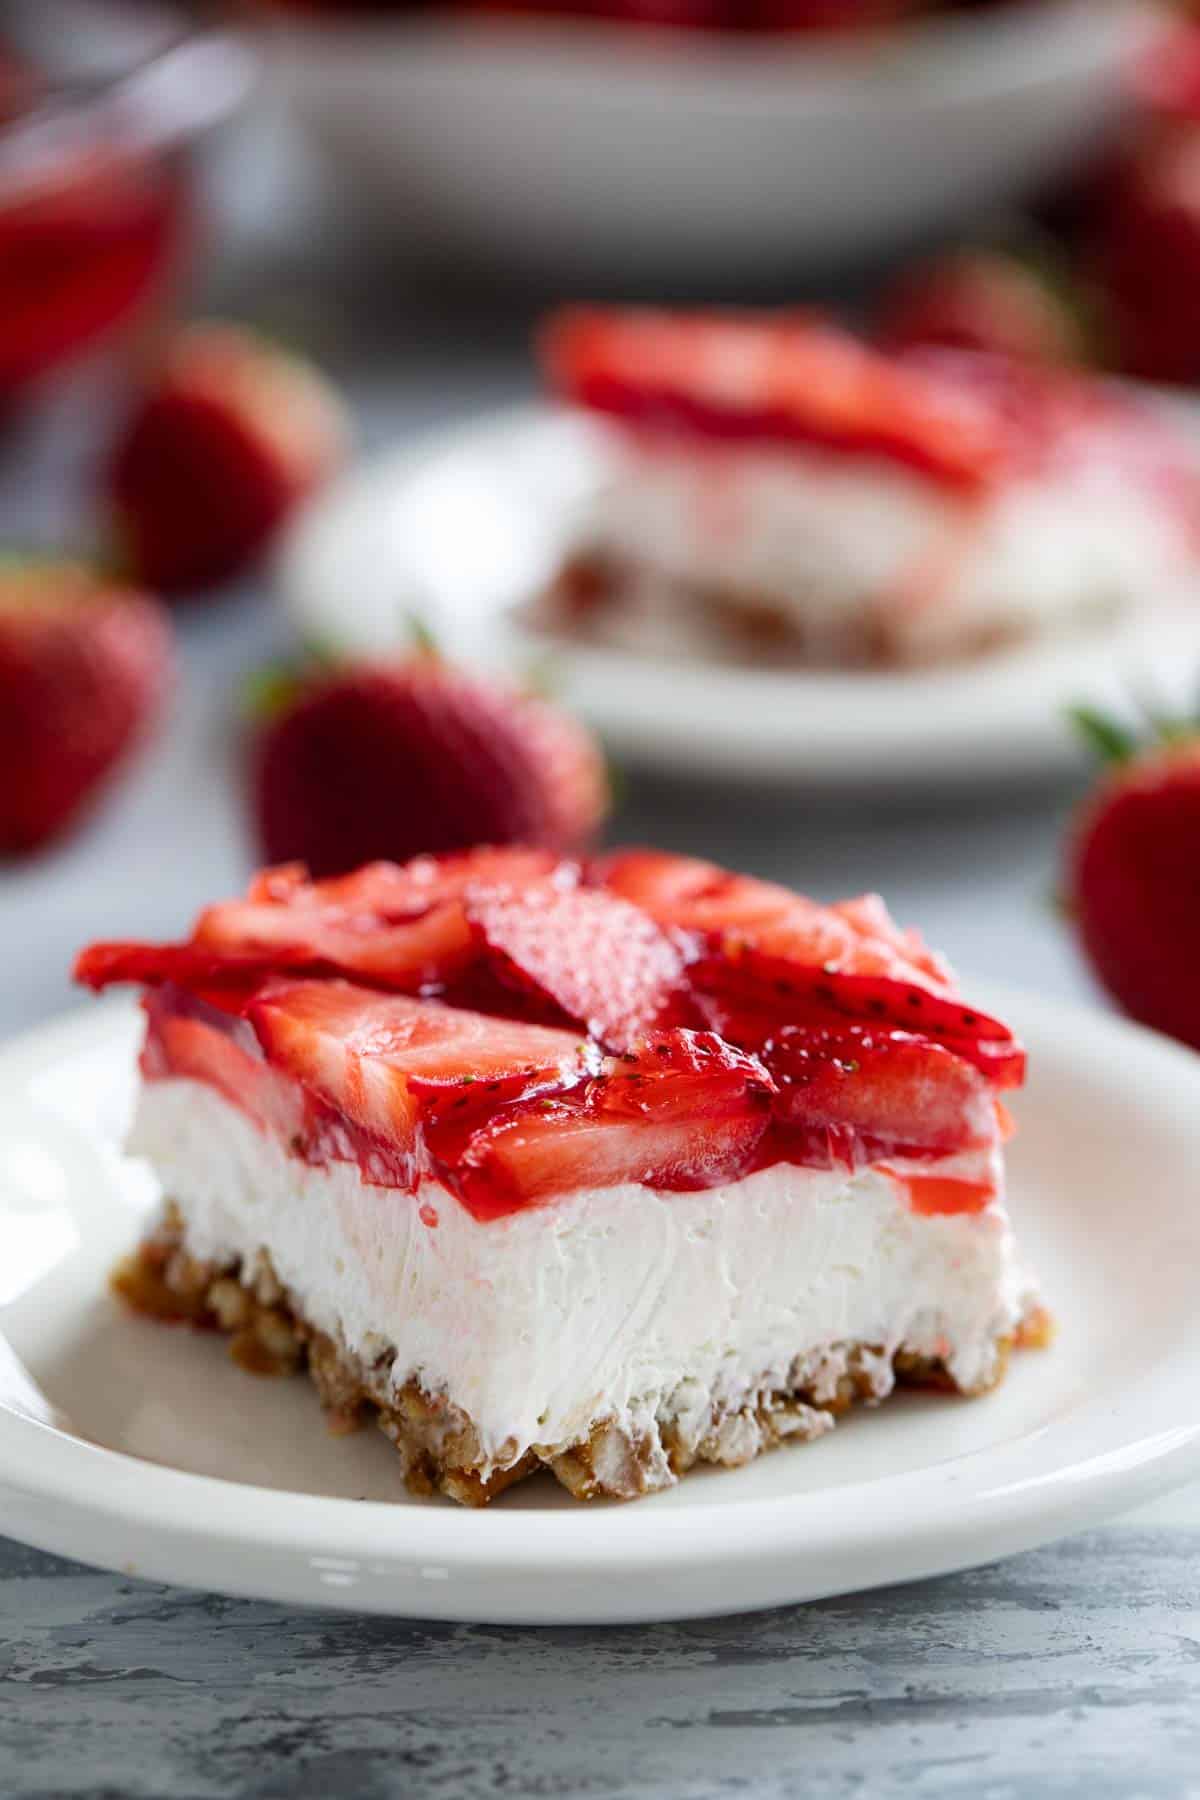 Slice of Strawberry Pretzel Salad on a plate with another slice in the background.